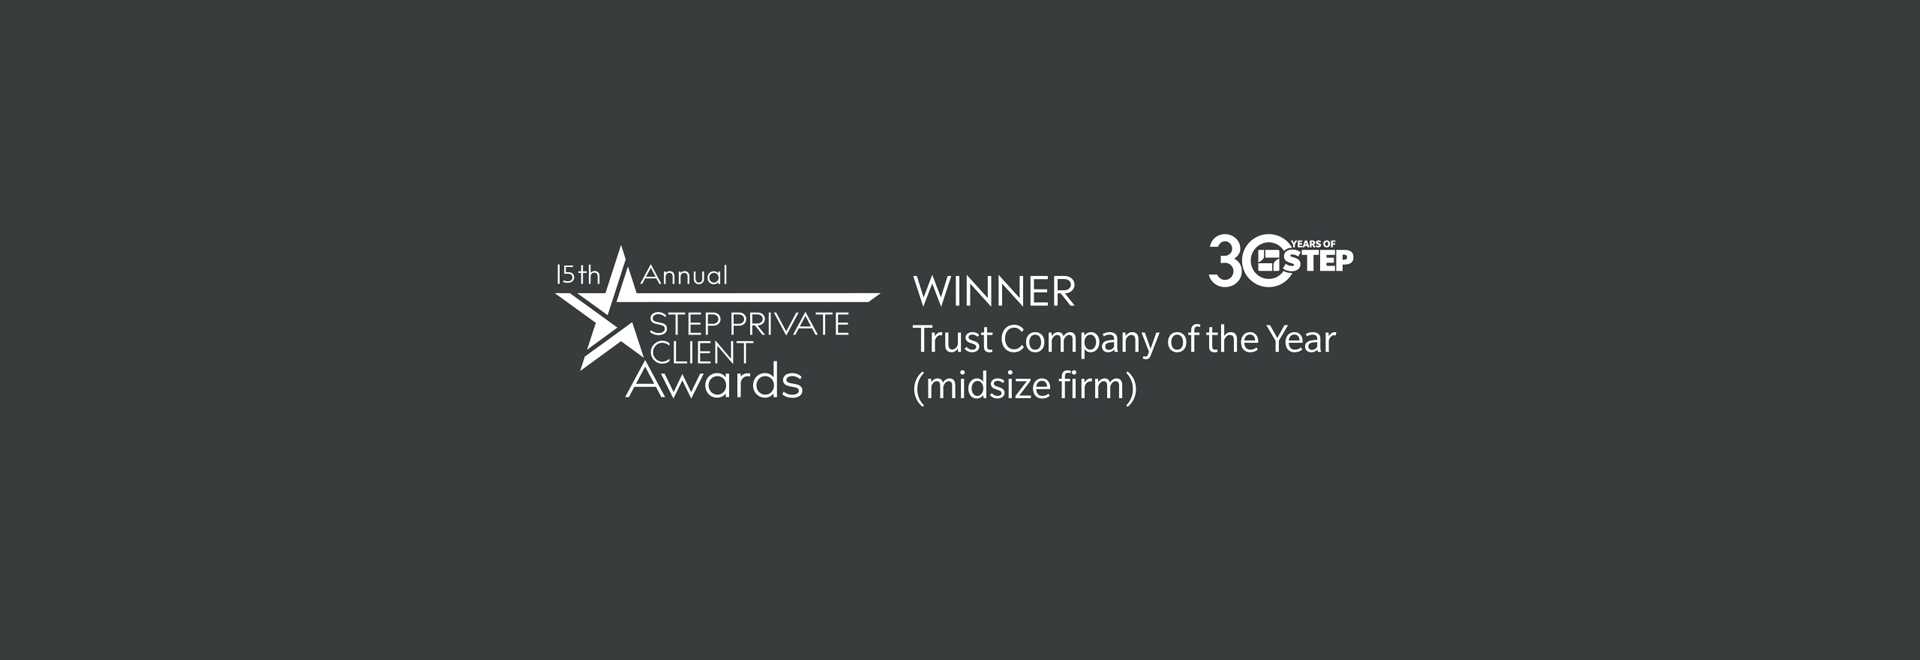 Milestone Third STEP Private Client Award For Accuro